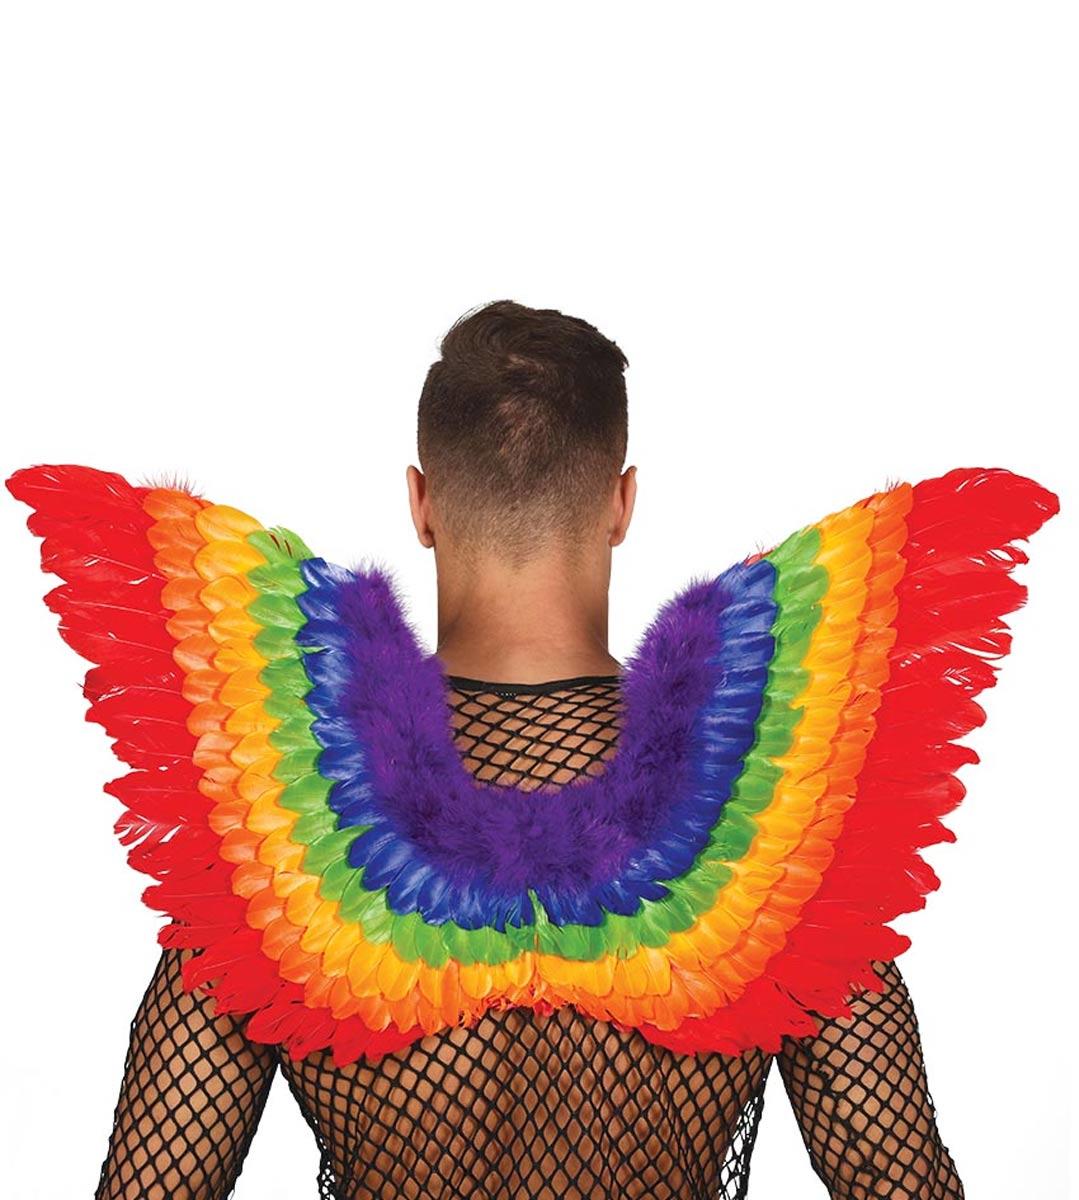 Multi-Coloured Rainbow Feather Wings or Pride Wings by Guirca 17300 available here at Karnival Costumes online party shop